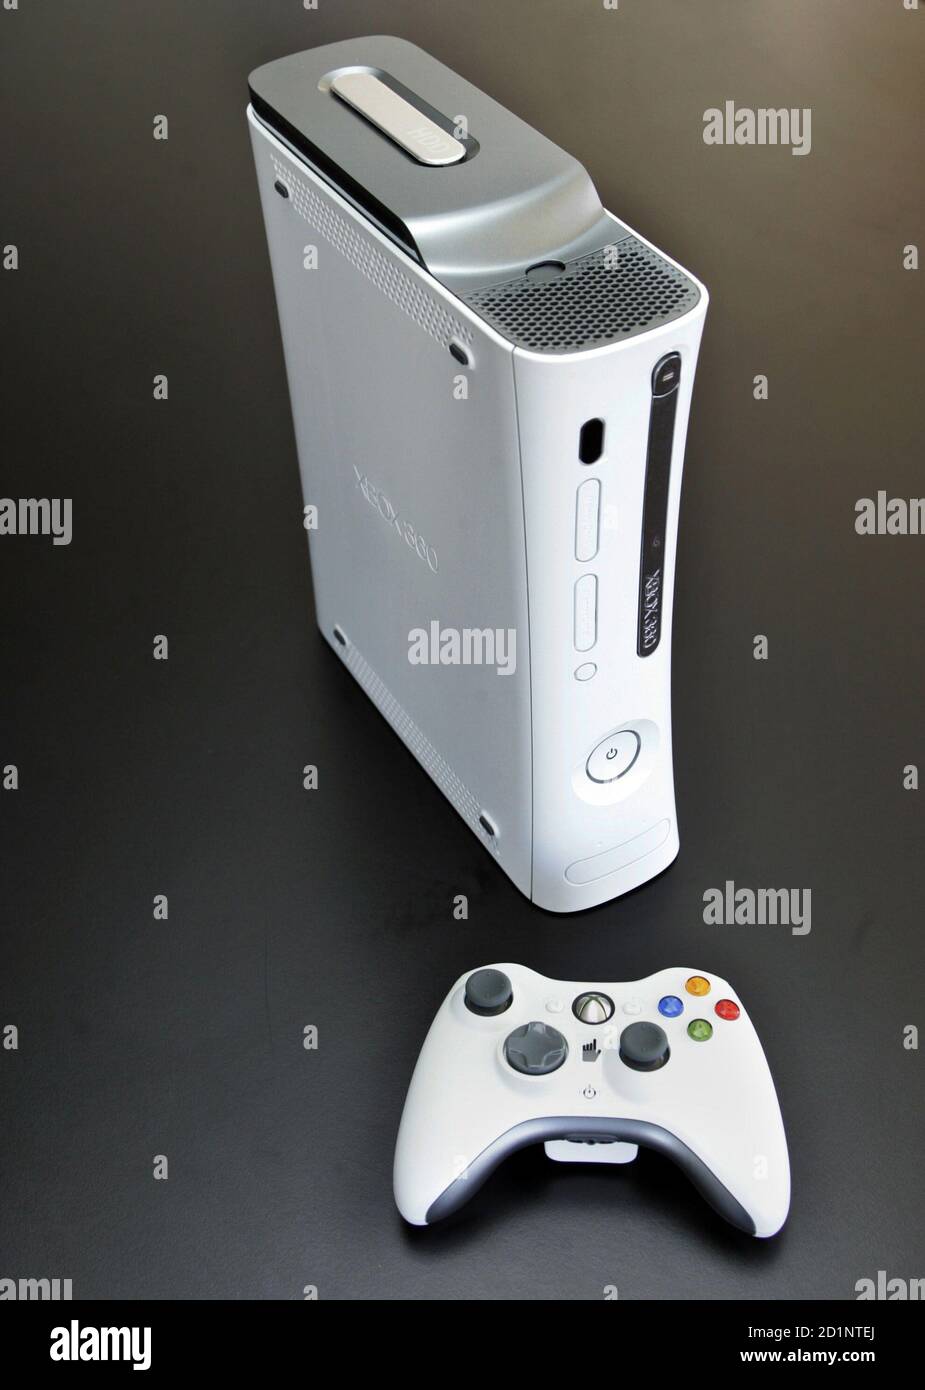 Microsoft Corp. Xbox 360 video game console and controller are pictured in  Los Angeles November 18, 2005. [Microsoft hopes to gain an advantage over  rivals Sony Corp. and Nintendo Co. Ltd.] by